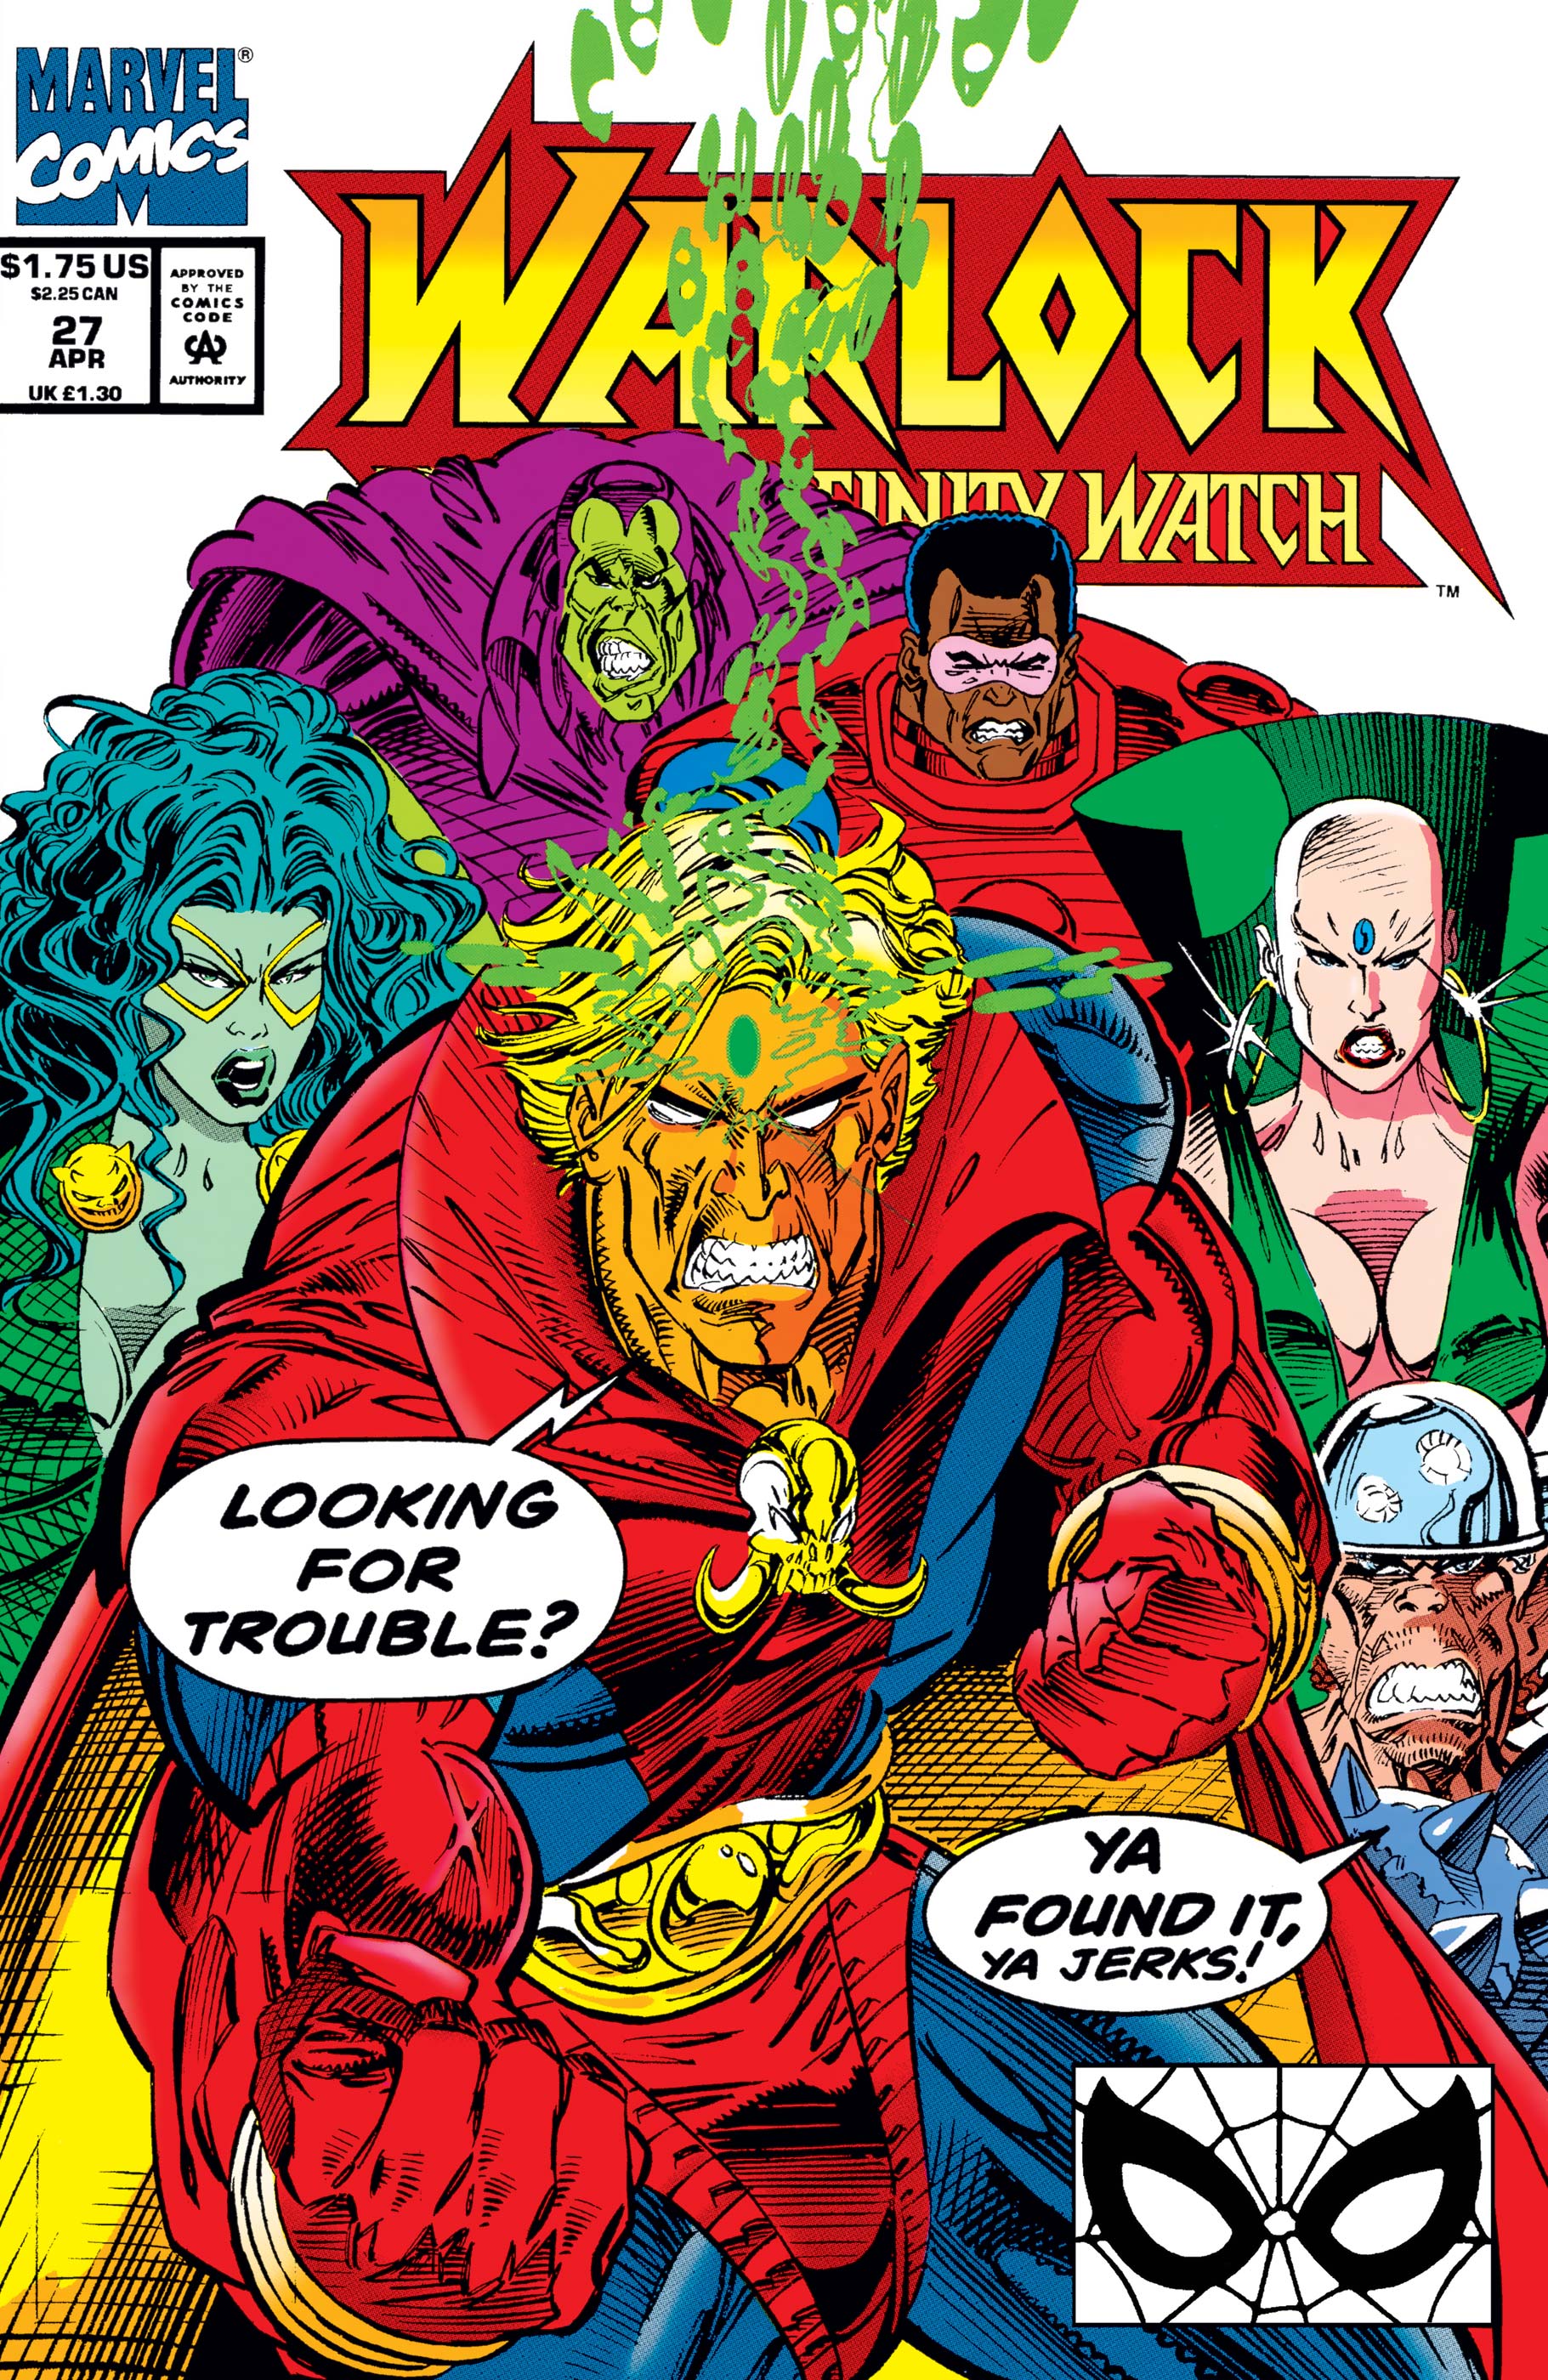 Warlock and the Infinity Watch (1992) #2